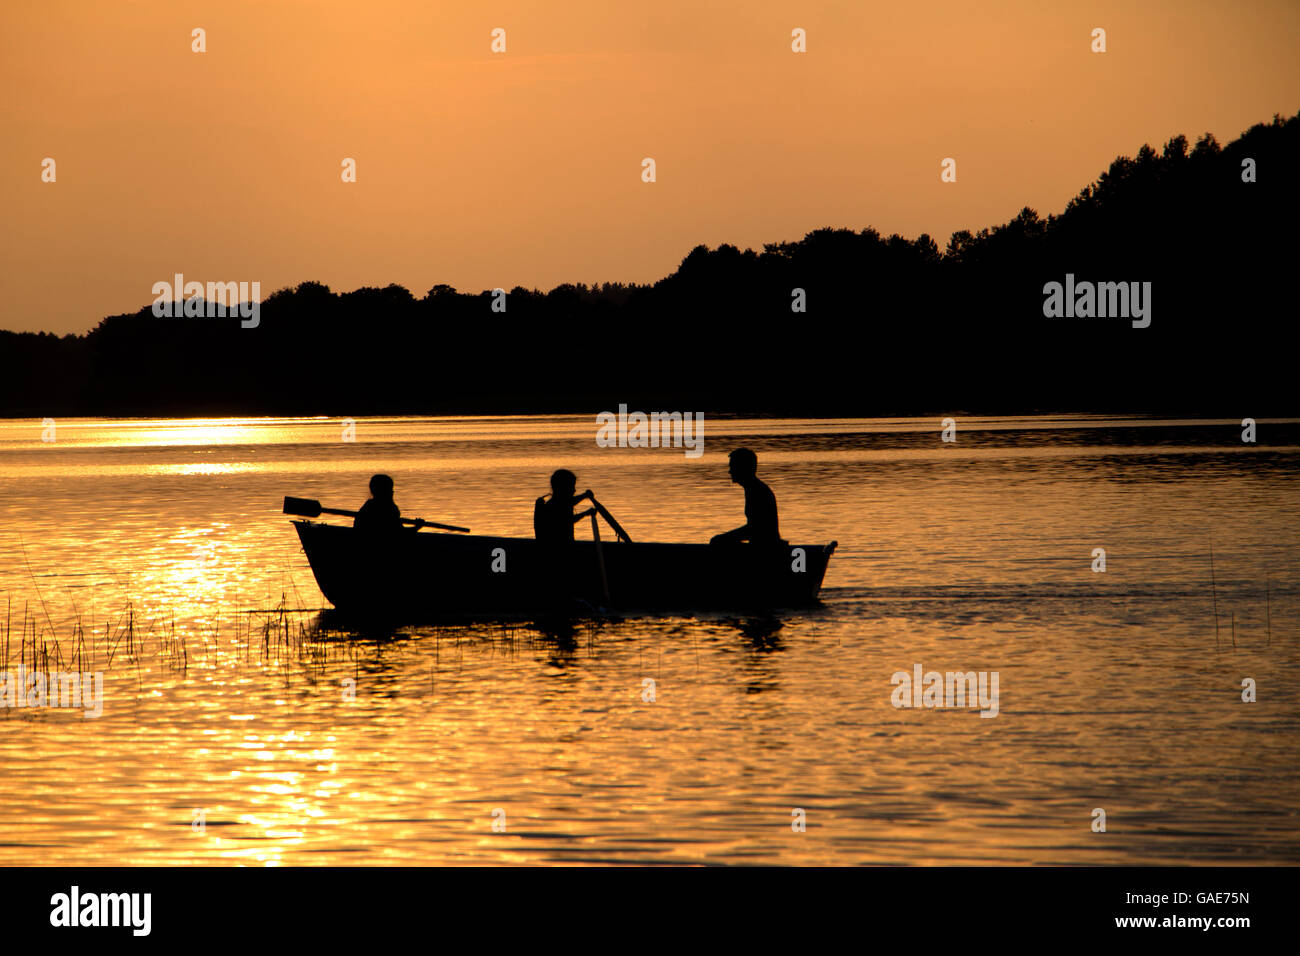 rowing wooden boat on lake in late evening with two girls and father people silhouettes Stock Photo